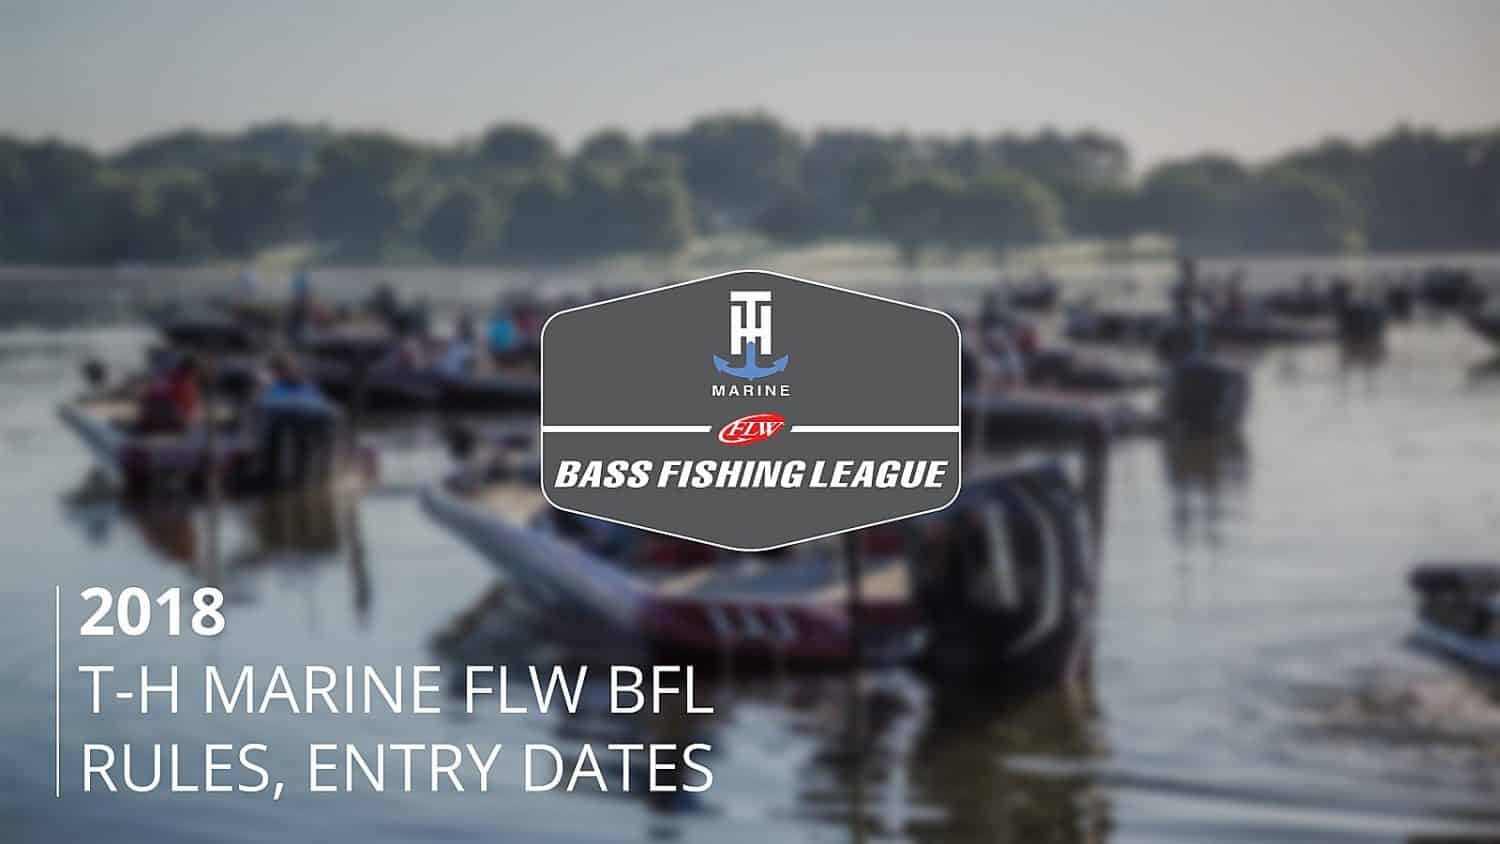 FLW ANNOUNCES 2018 T-H MARINE BFL SCHEDULE, RULES – Anglers Channel